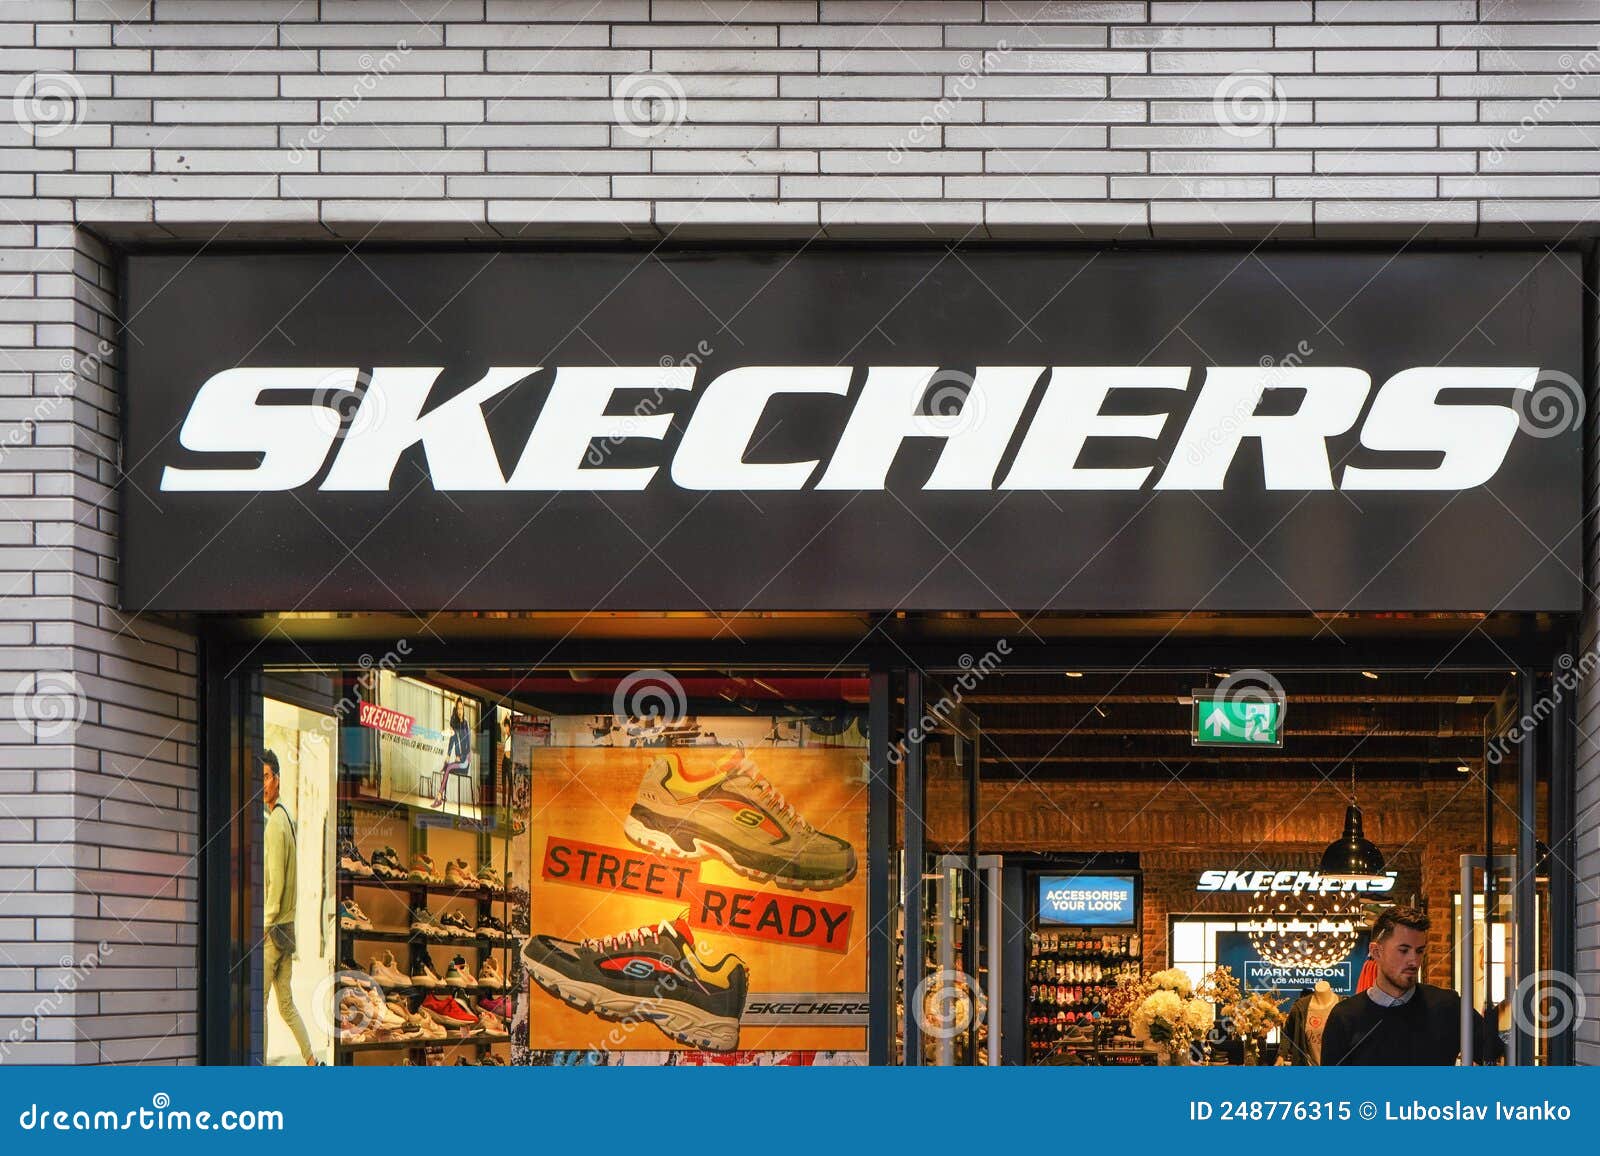 289 Skechers Shop Stock Photos Free & Royalty-Free Stock Photos from